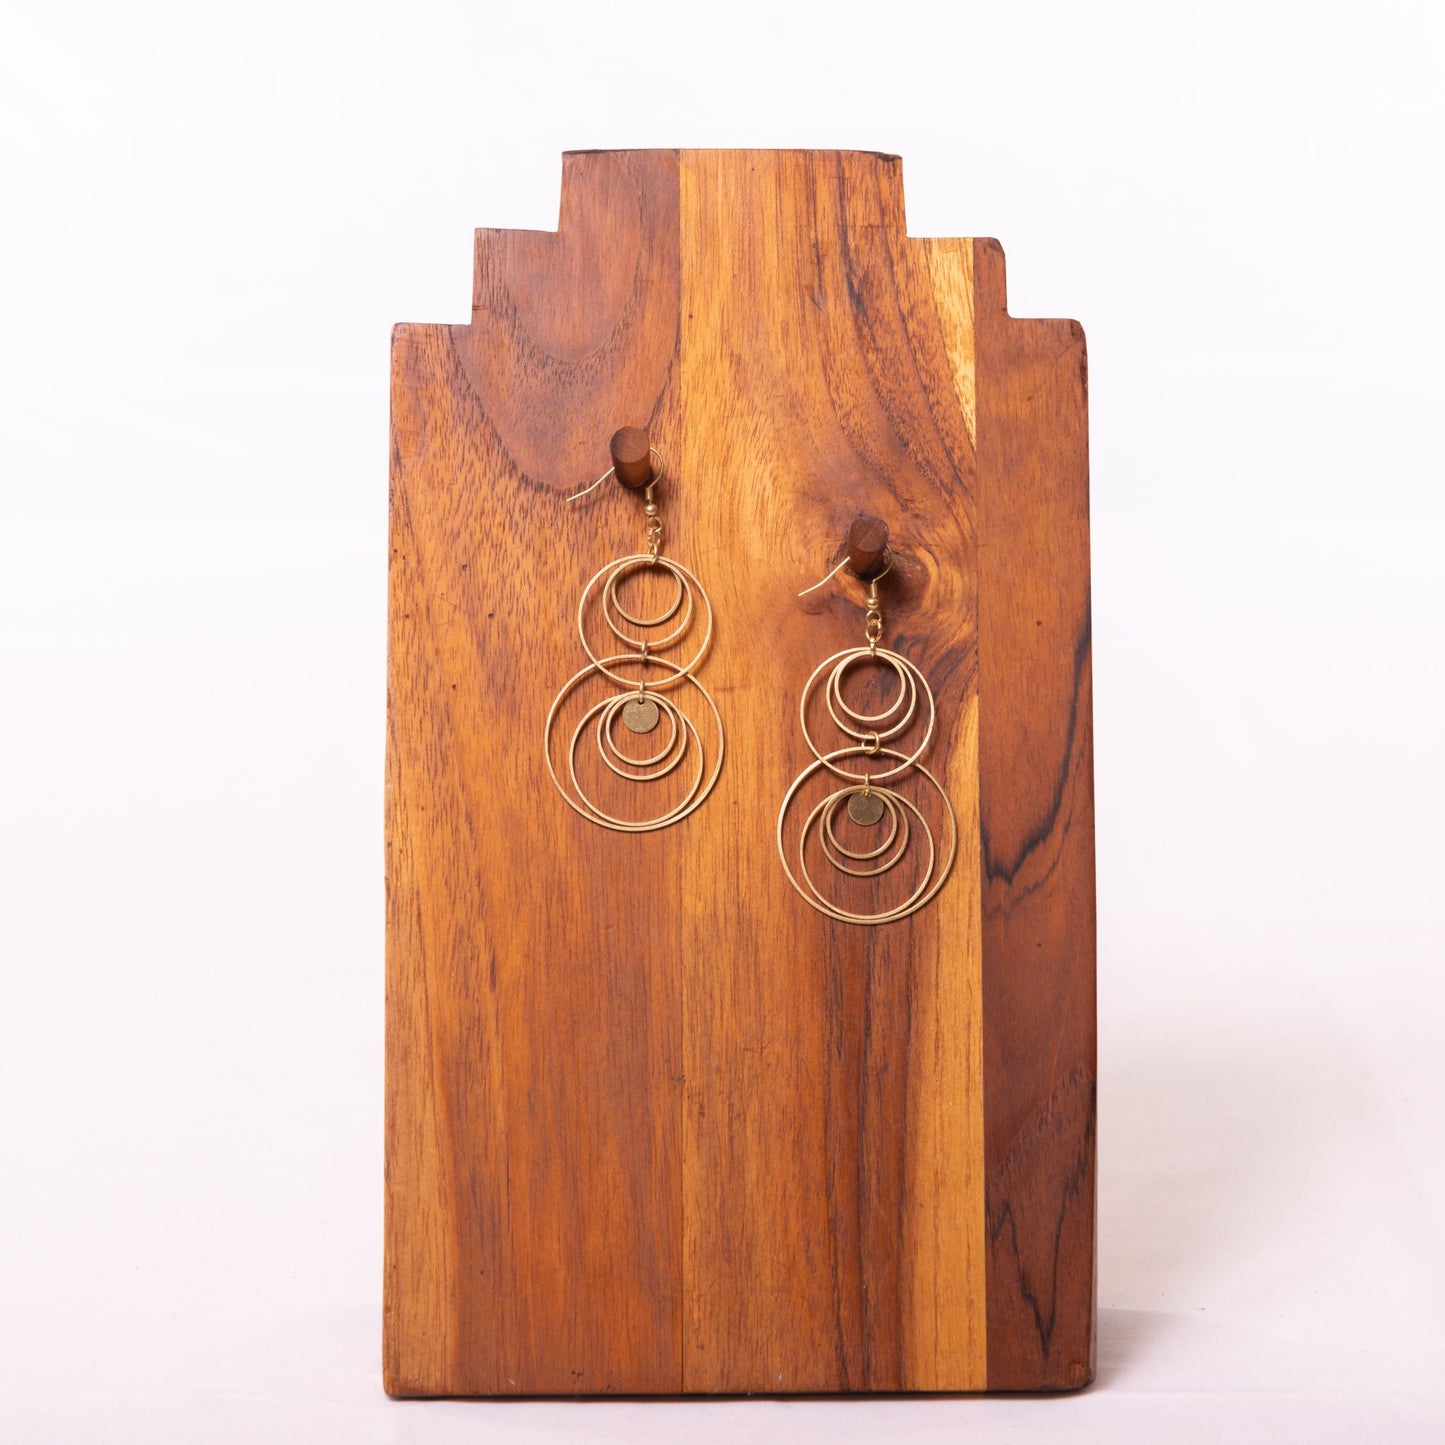 NEW! Duara Brass Circle Earrings  Handmade and Fair Trade - against wooden background